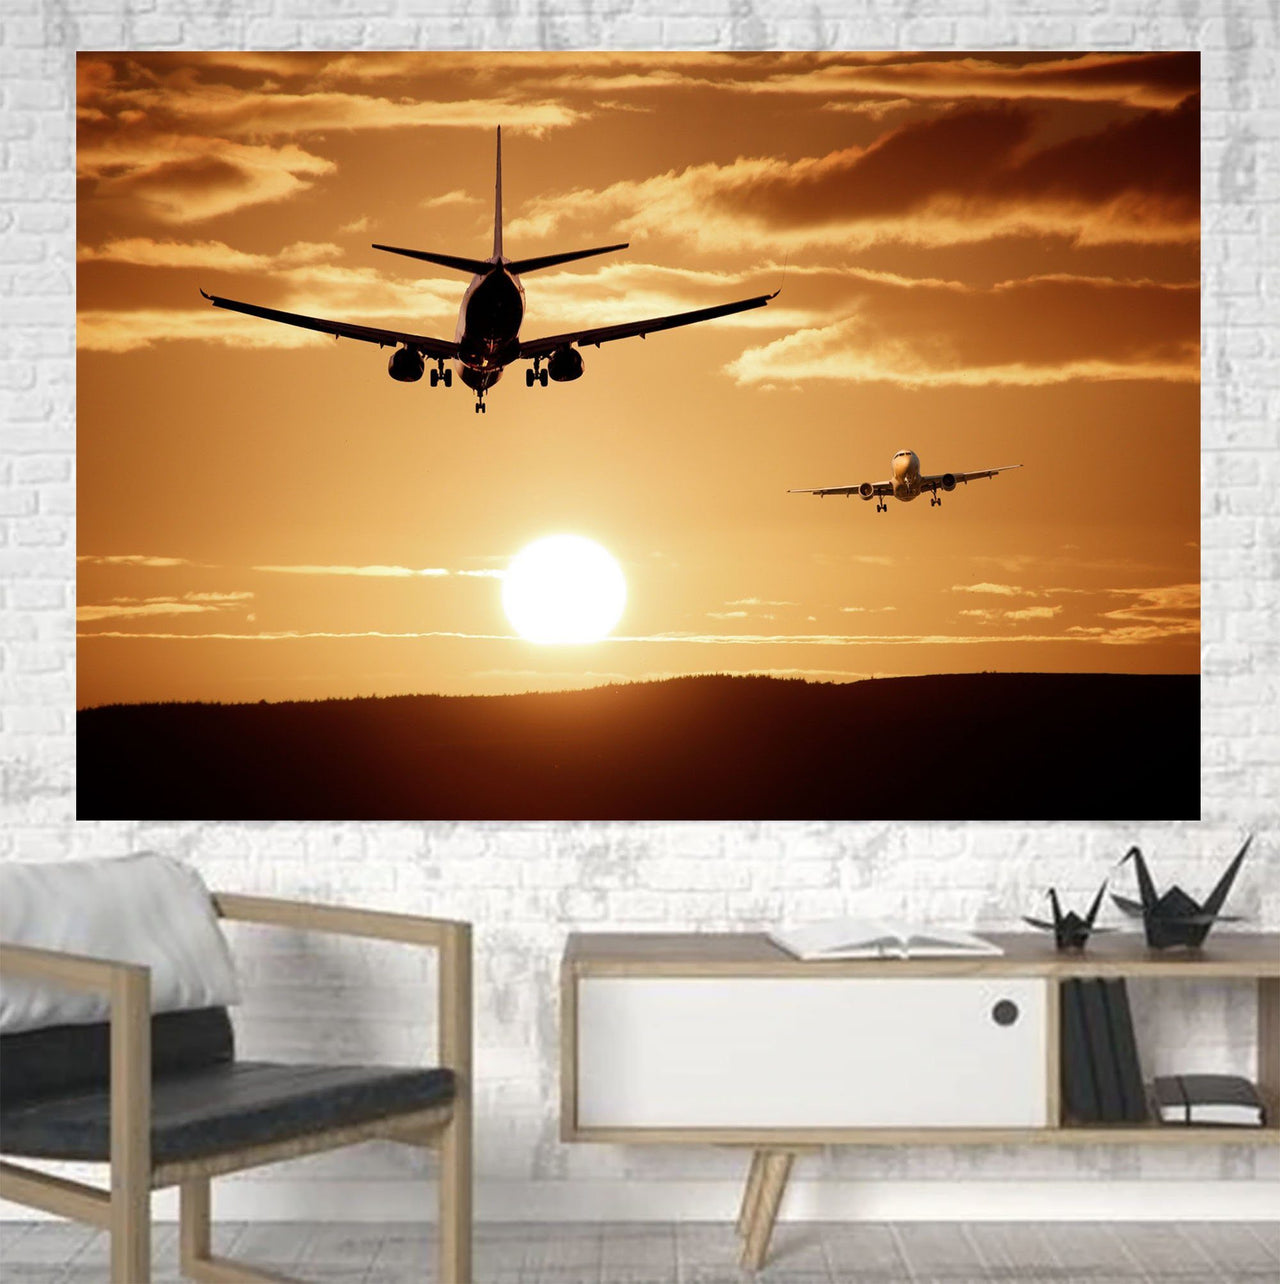 Two Aeroplanes During Sunset Printed Canvas Posters (1 Piece) Aviation Shop 